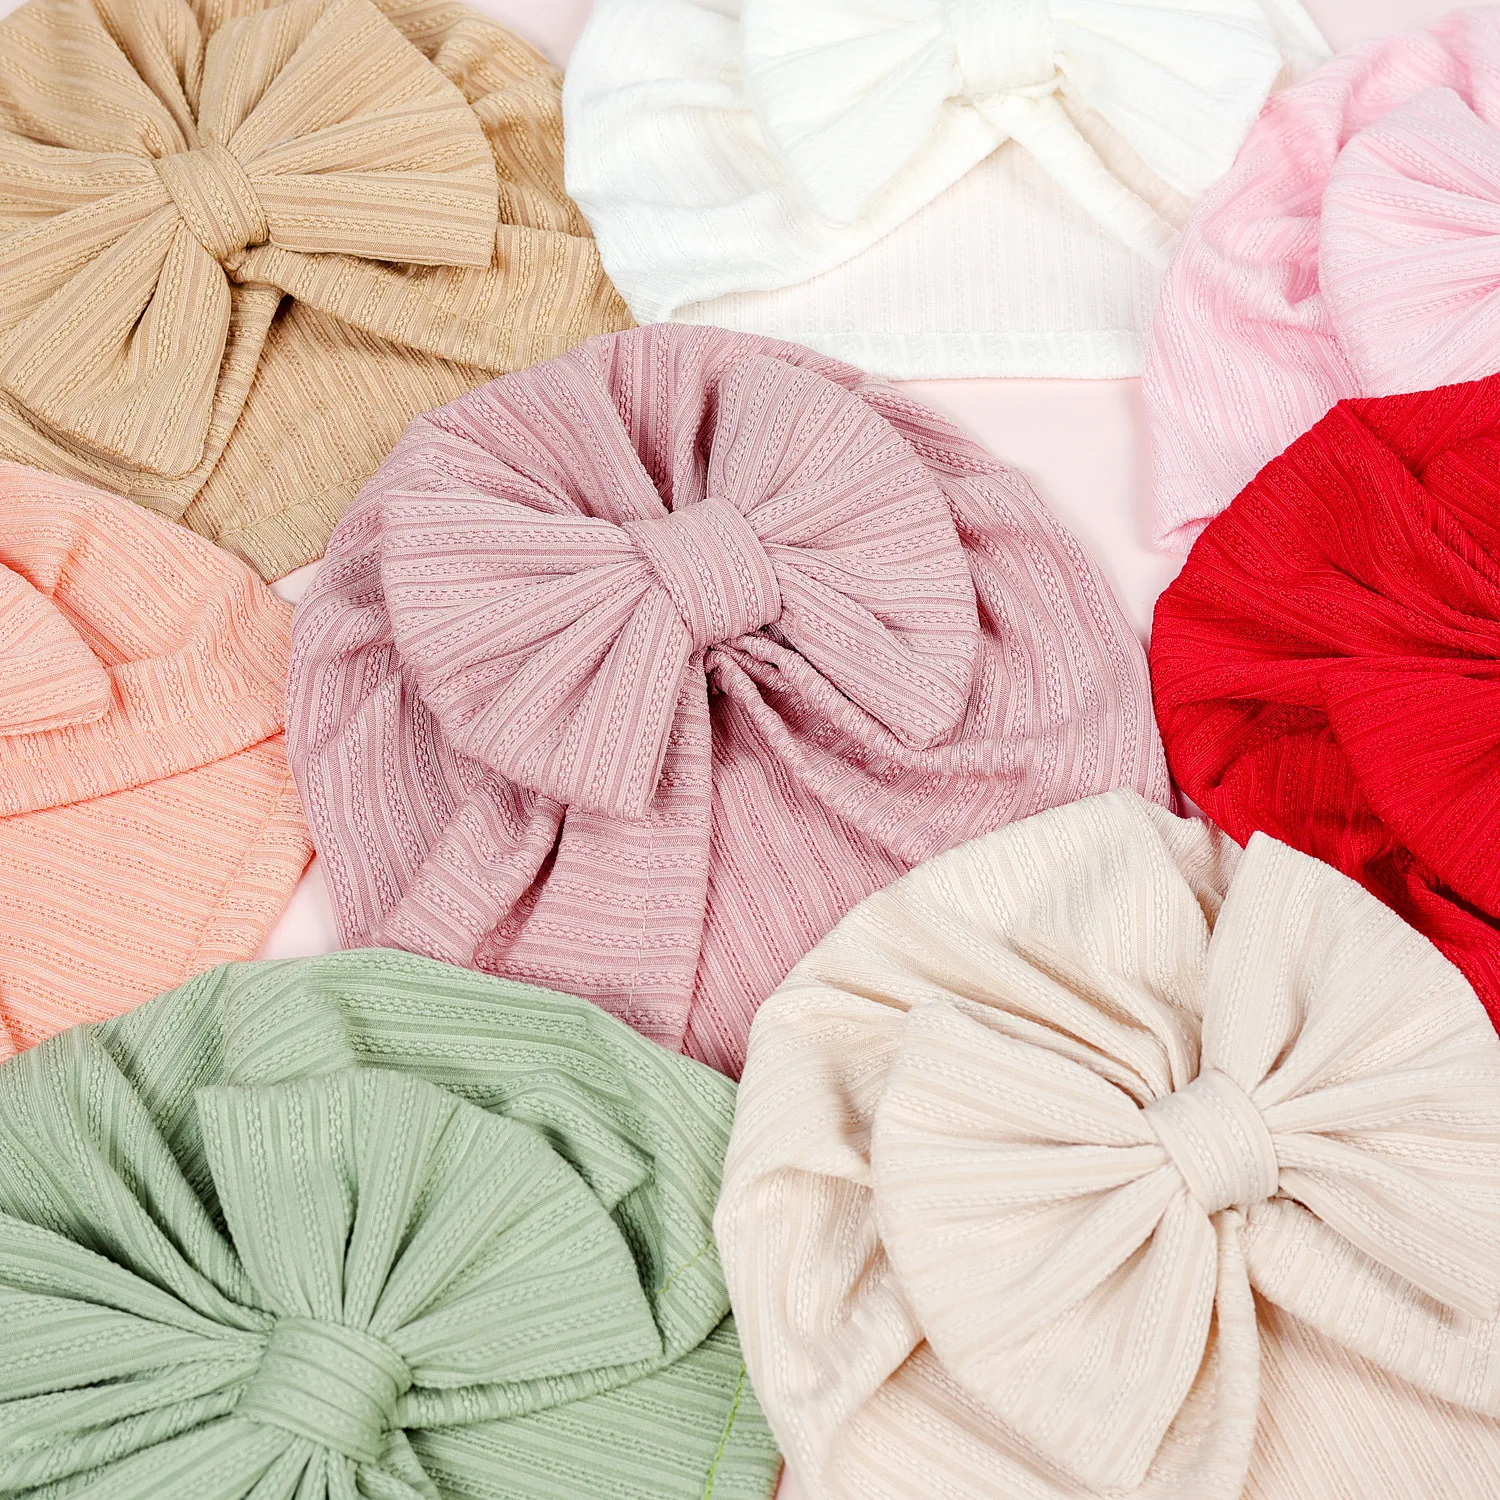 2023 New 1Pcs Baby Girls Boys Headband Cute Big Bow Hats Solid Color Soft Newborn Accessories For Toddler Turban Infant Headwear